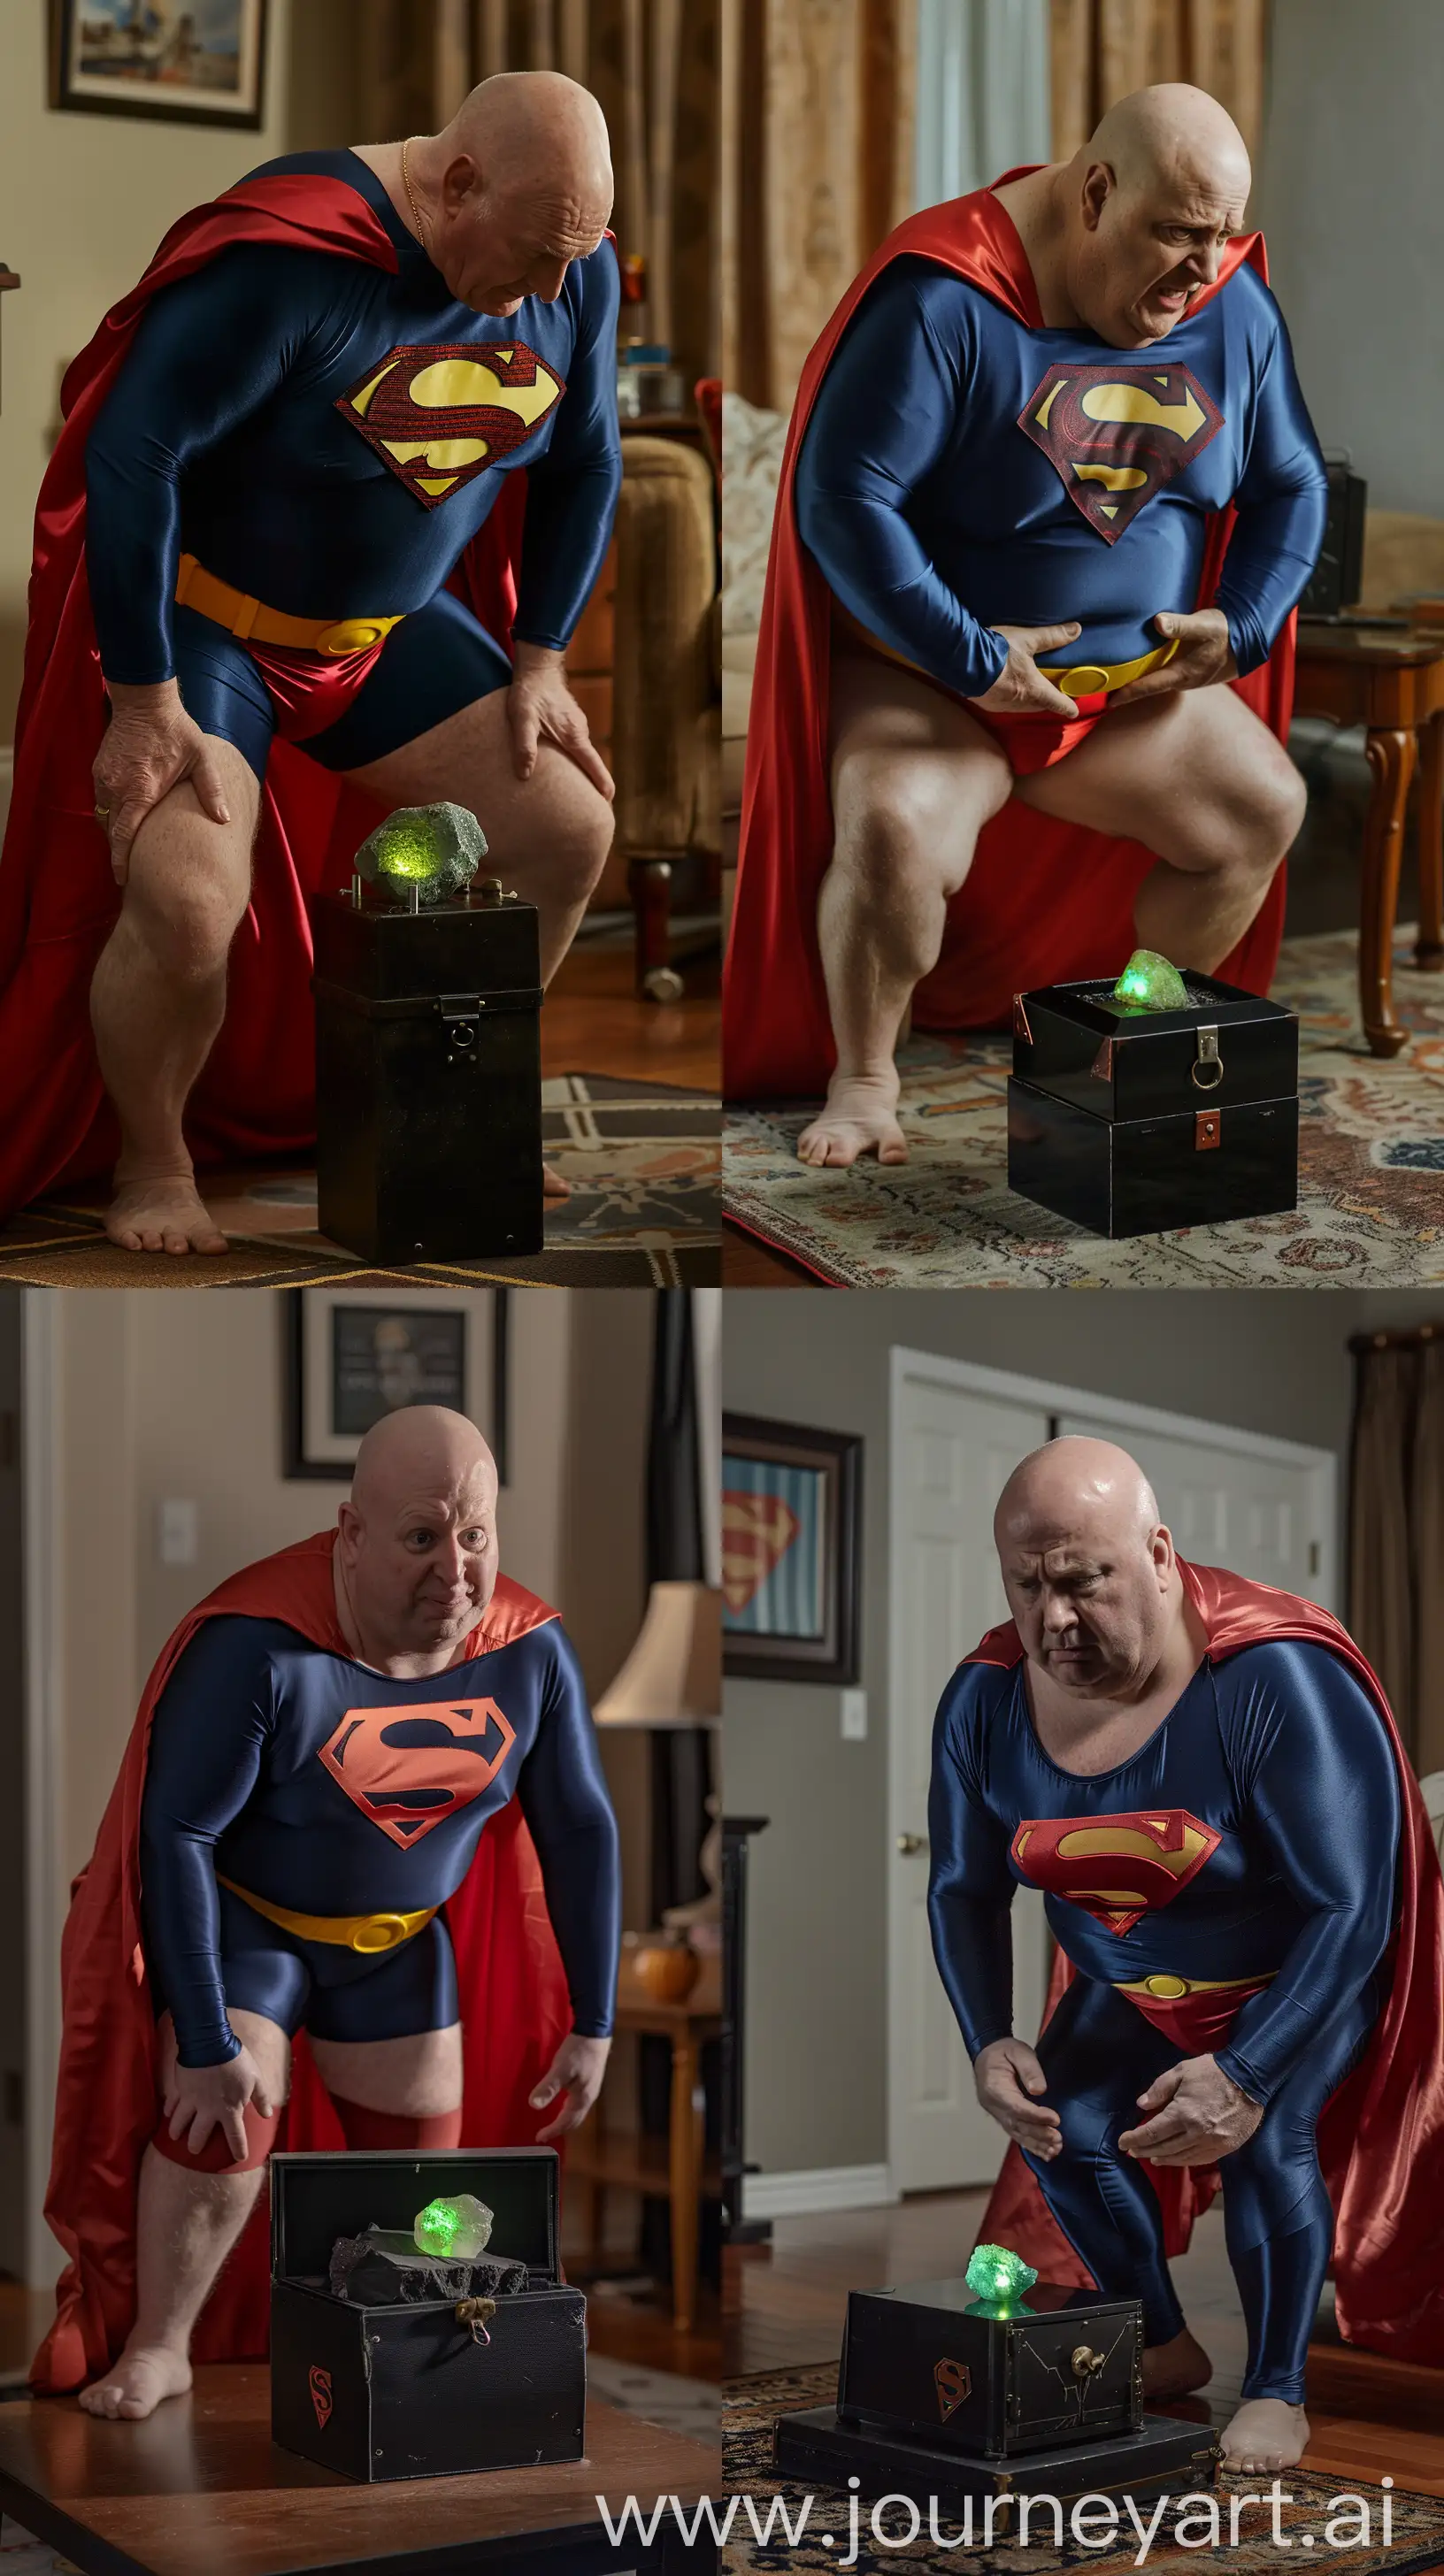 Front close-up photo of a trembling fat man aged 60 wearing silk navy blue complete superman tight uniform with a large red cape red trunks, yellow belt. Bending the knees in front of a small black metal box placed on a table containing a small bright green glowing rock. Inside a living room. Bald. Clean Shaven. Natural light. --ar 9:16